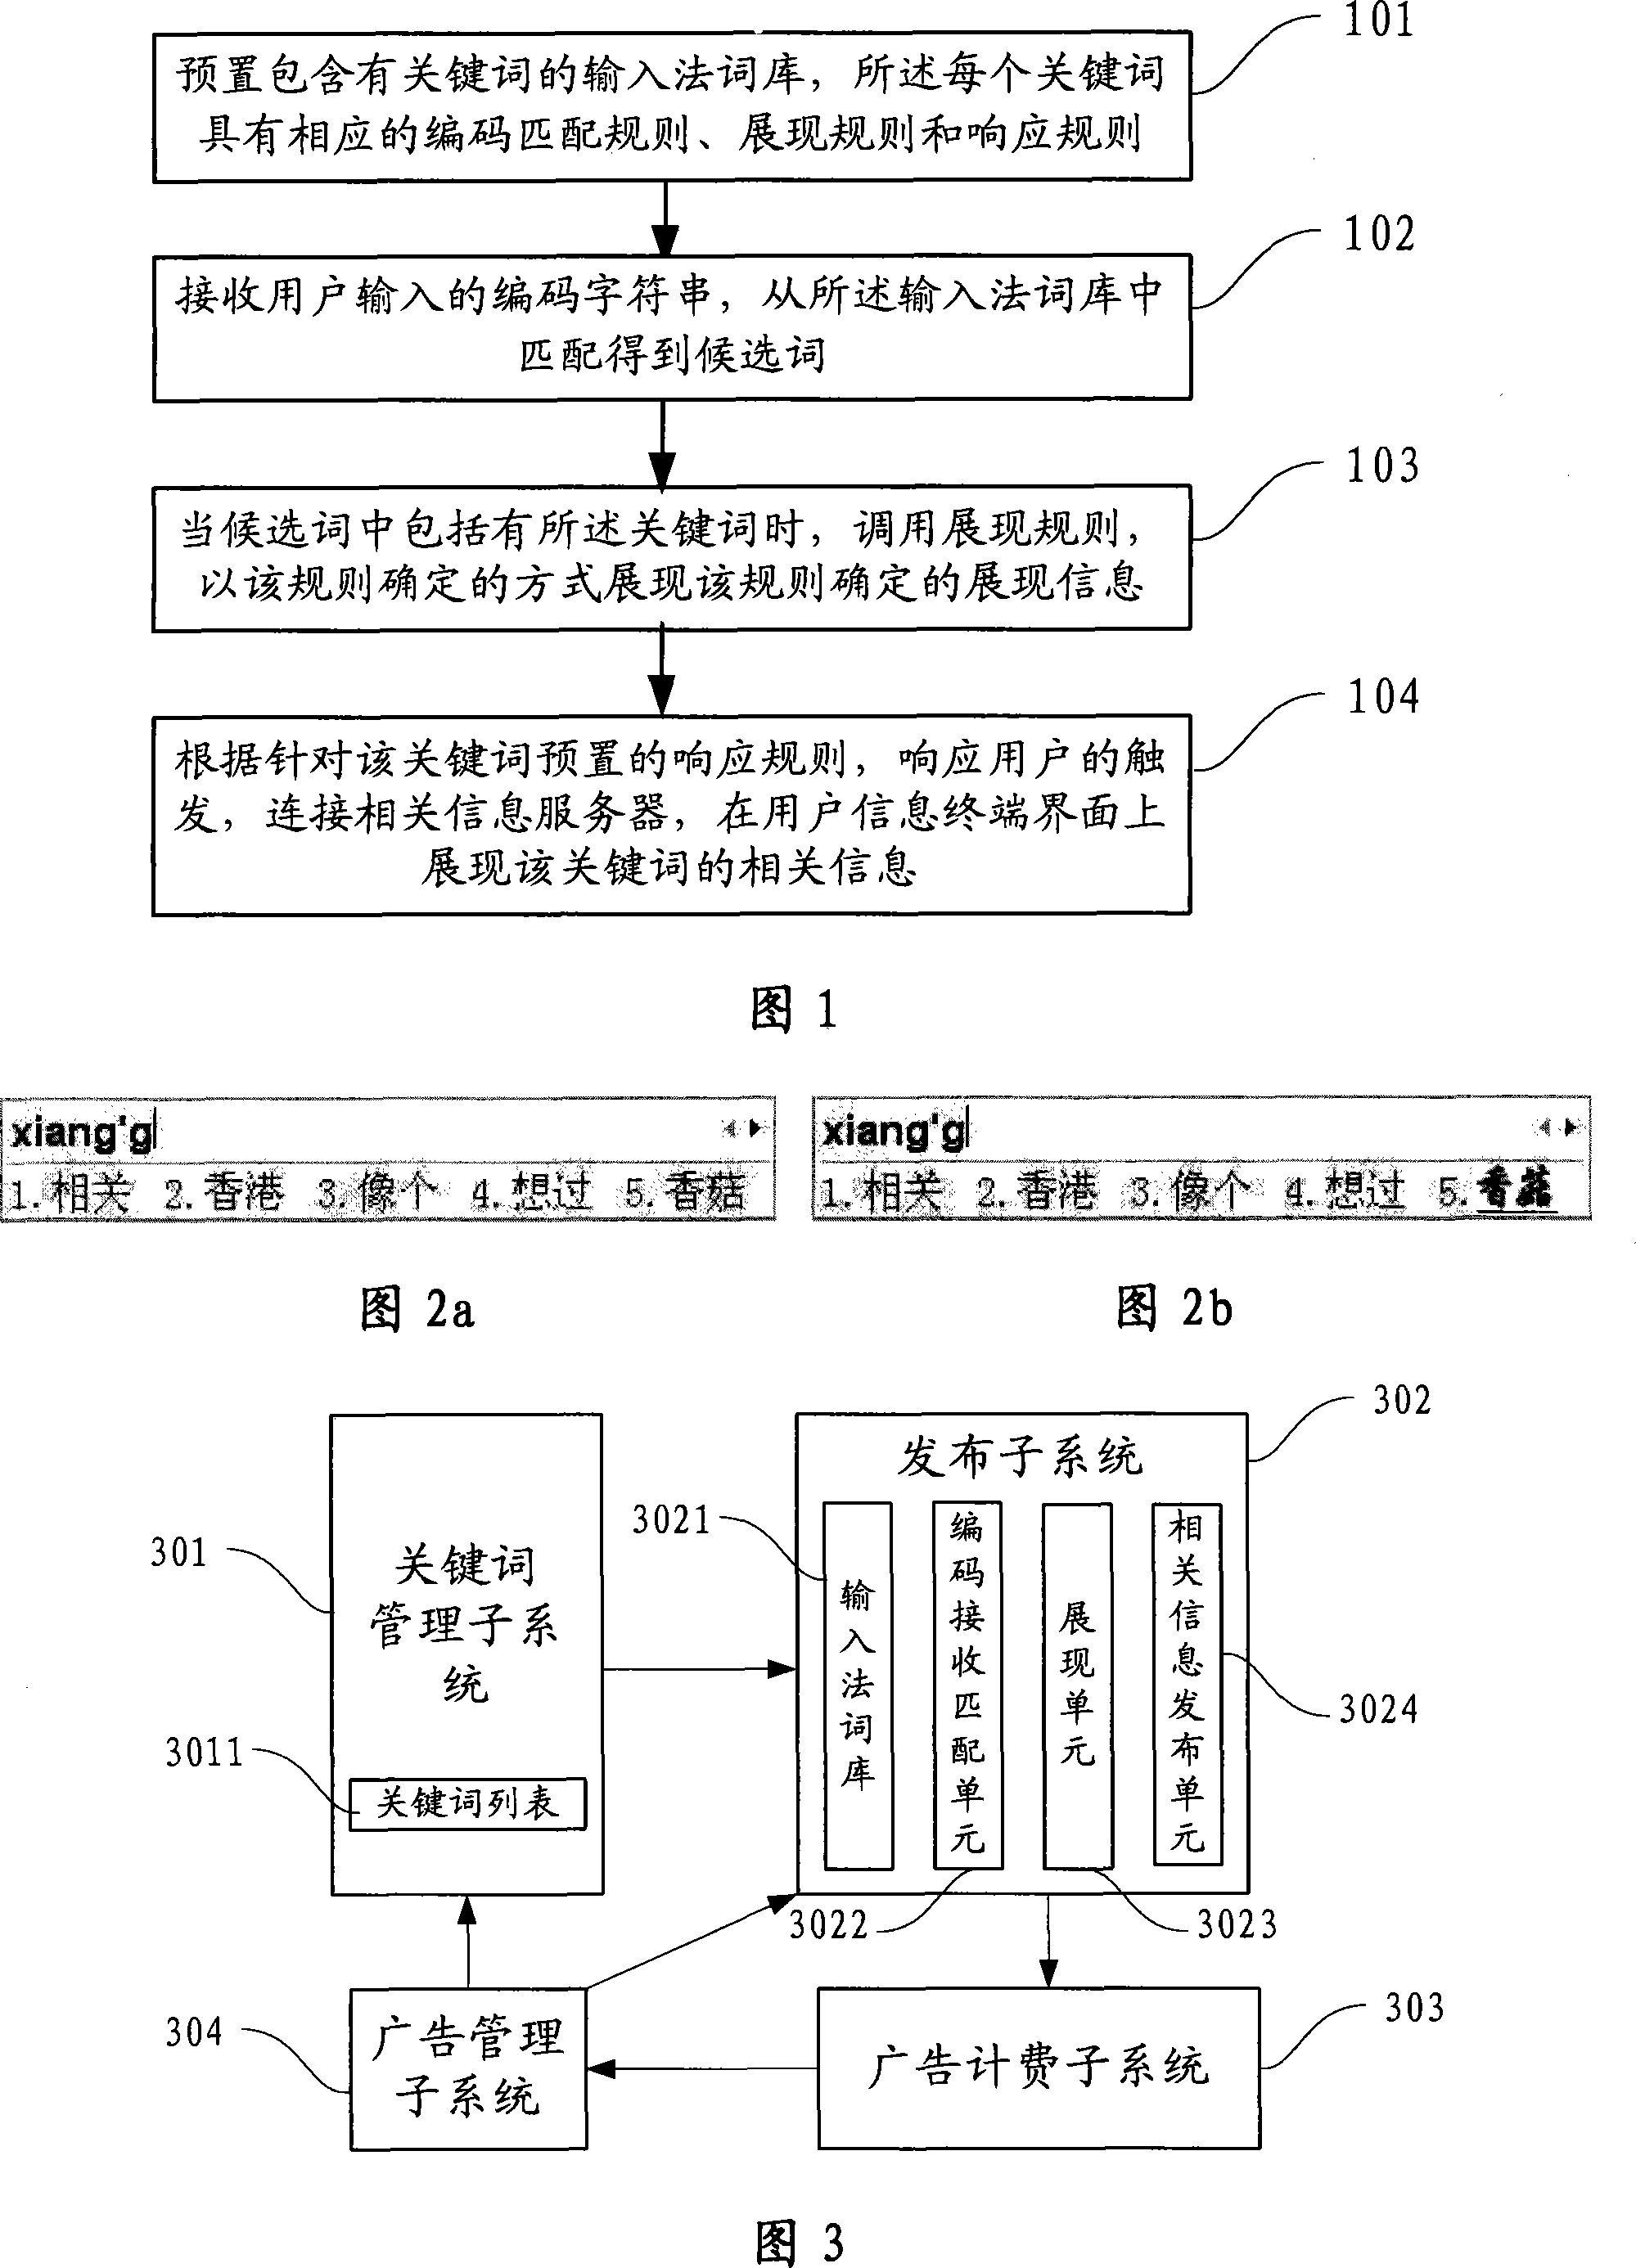 Method and system for publishing information related to internet key character